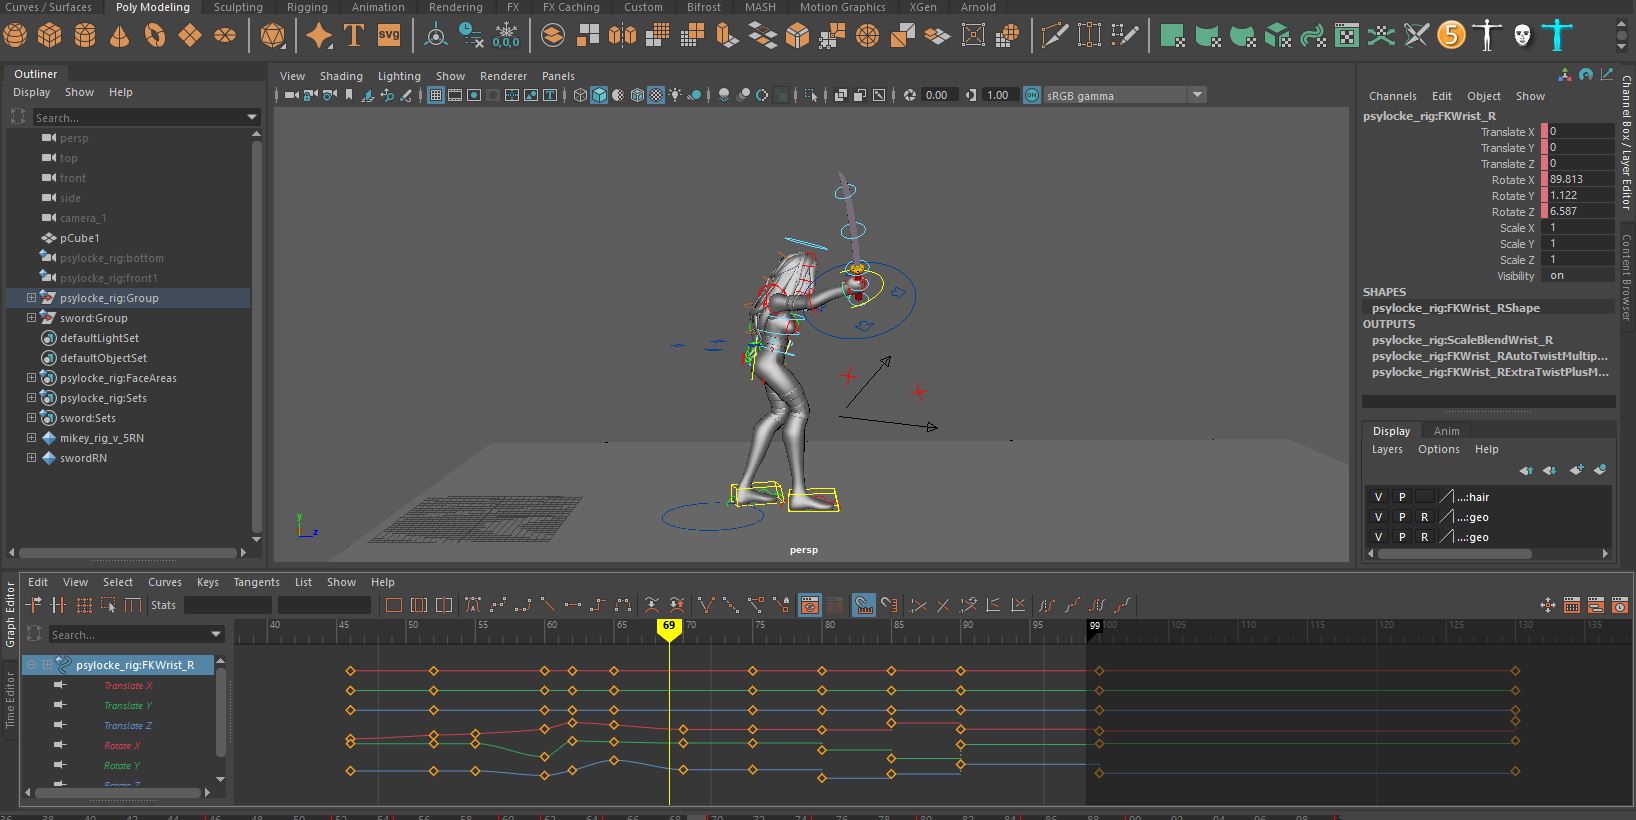 Keyframes disapeared from one controller on a rig - Autodesk Community